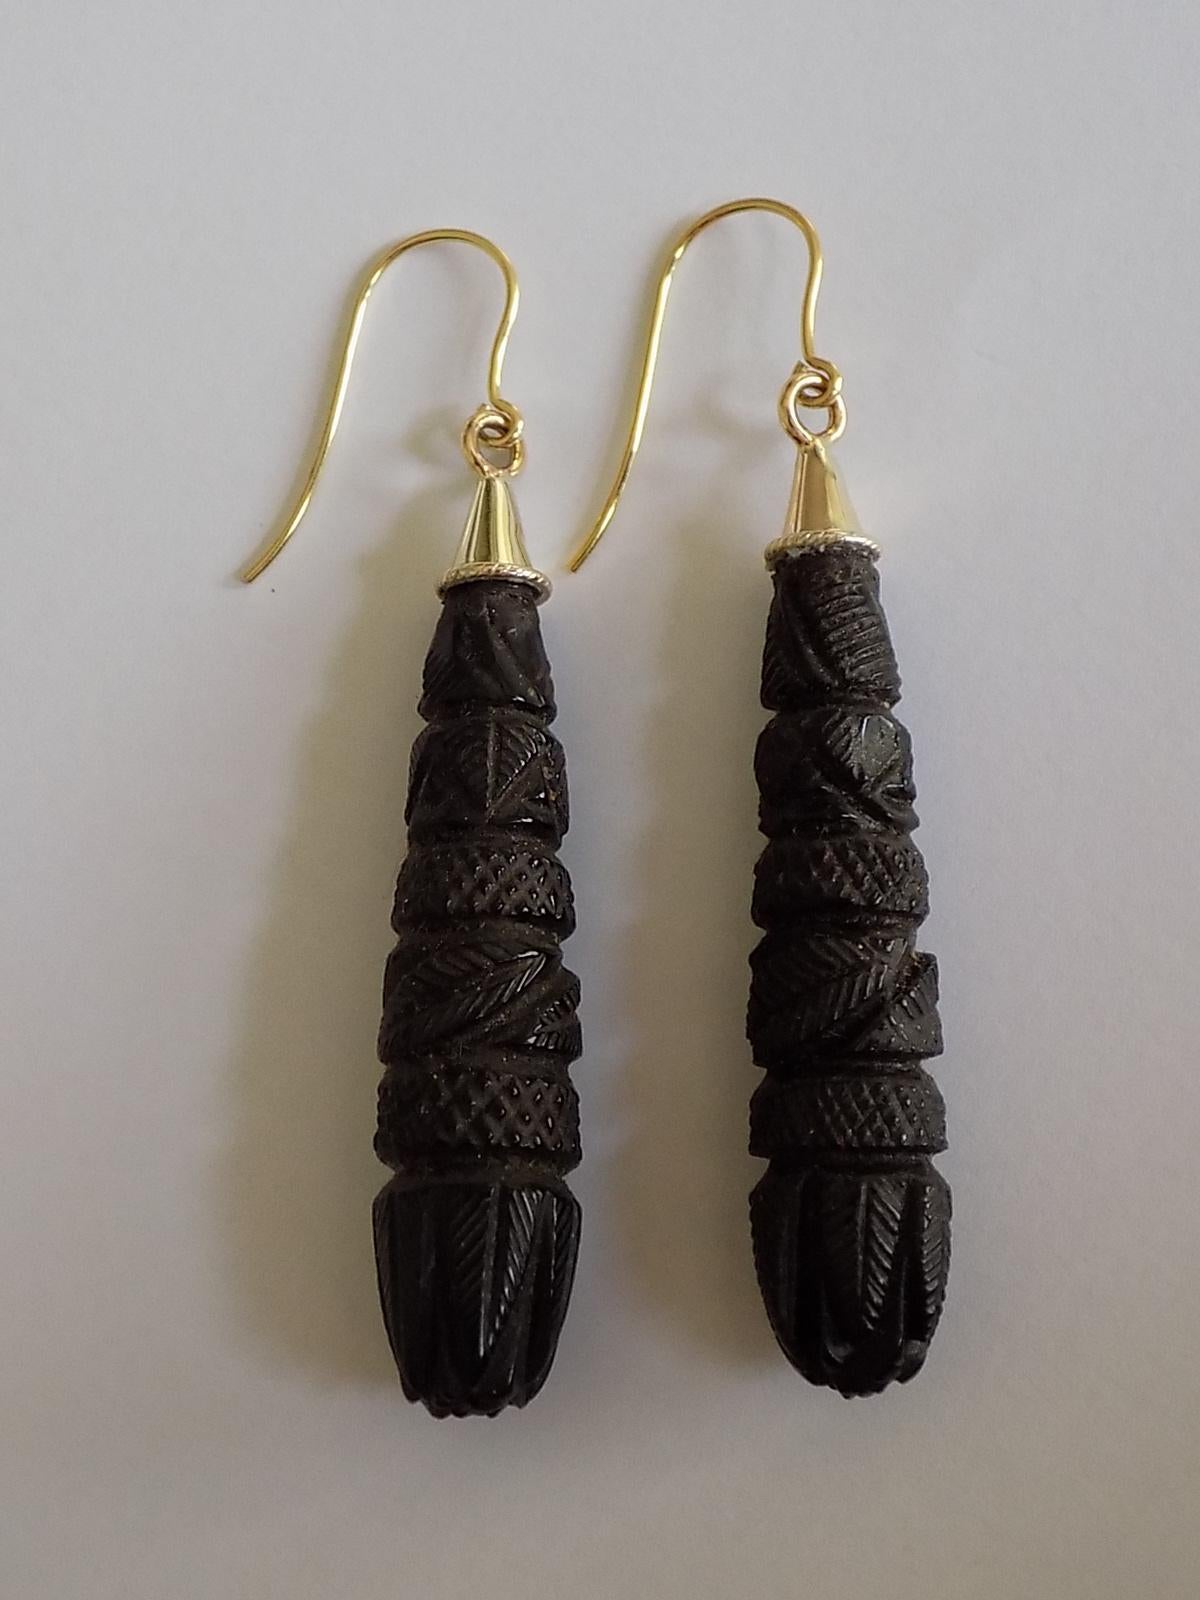 A Classic Victorian c.1880 carved Whitby Jet drop earrings for pierced ears. The earrings complete with a brand new 9 Carat Gold hook wires. English origin. 
Total drop including hooks 60mm
Width of the drop 10mm.
Weight 5.8gr.
Hooks marked 375 for